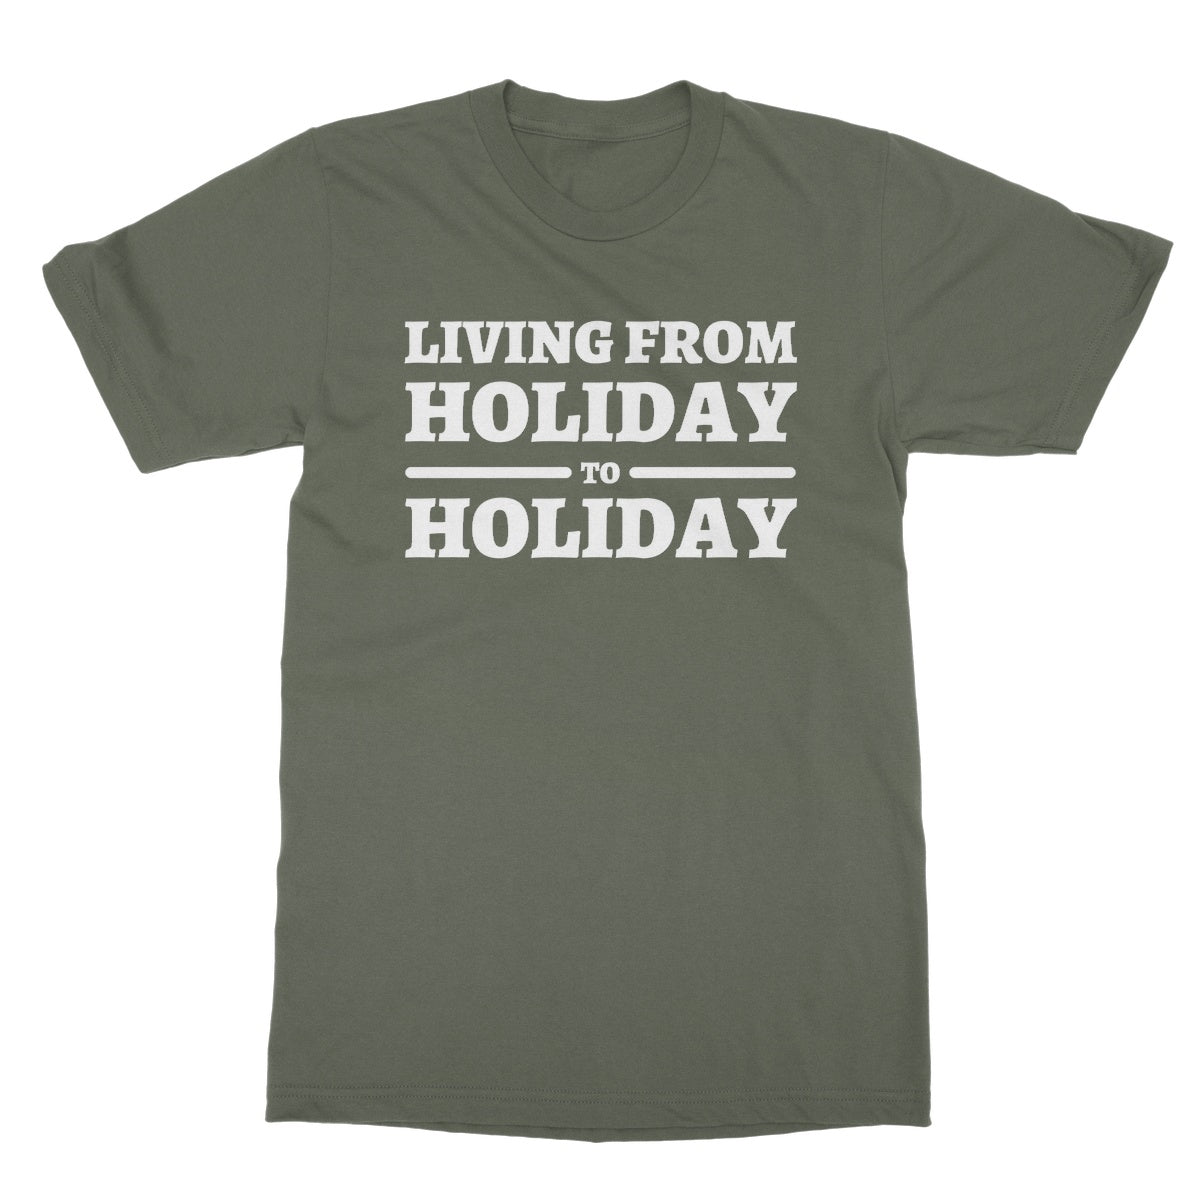 living from holiday to holiday t shirt green